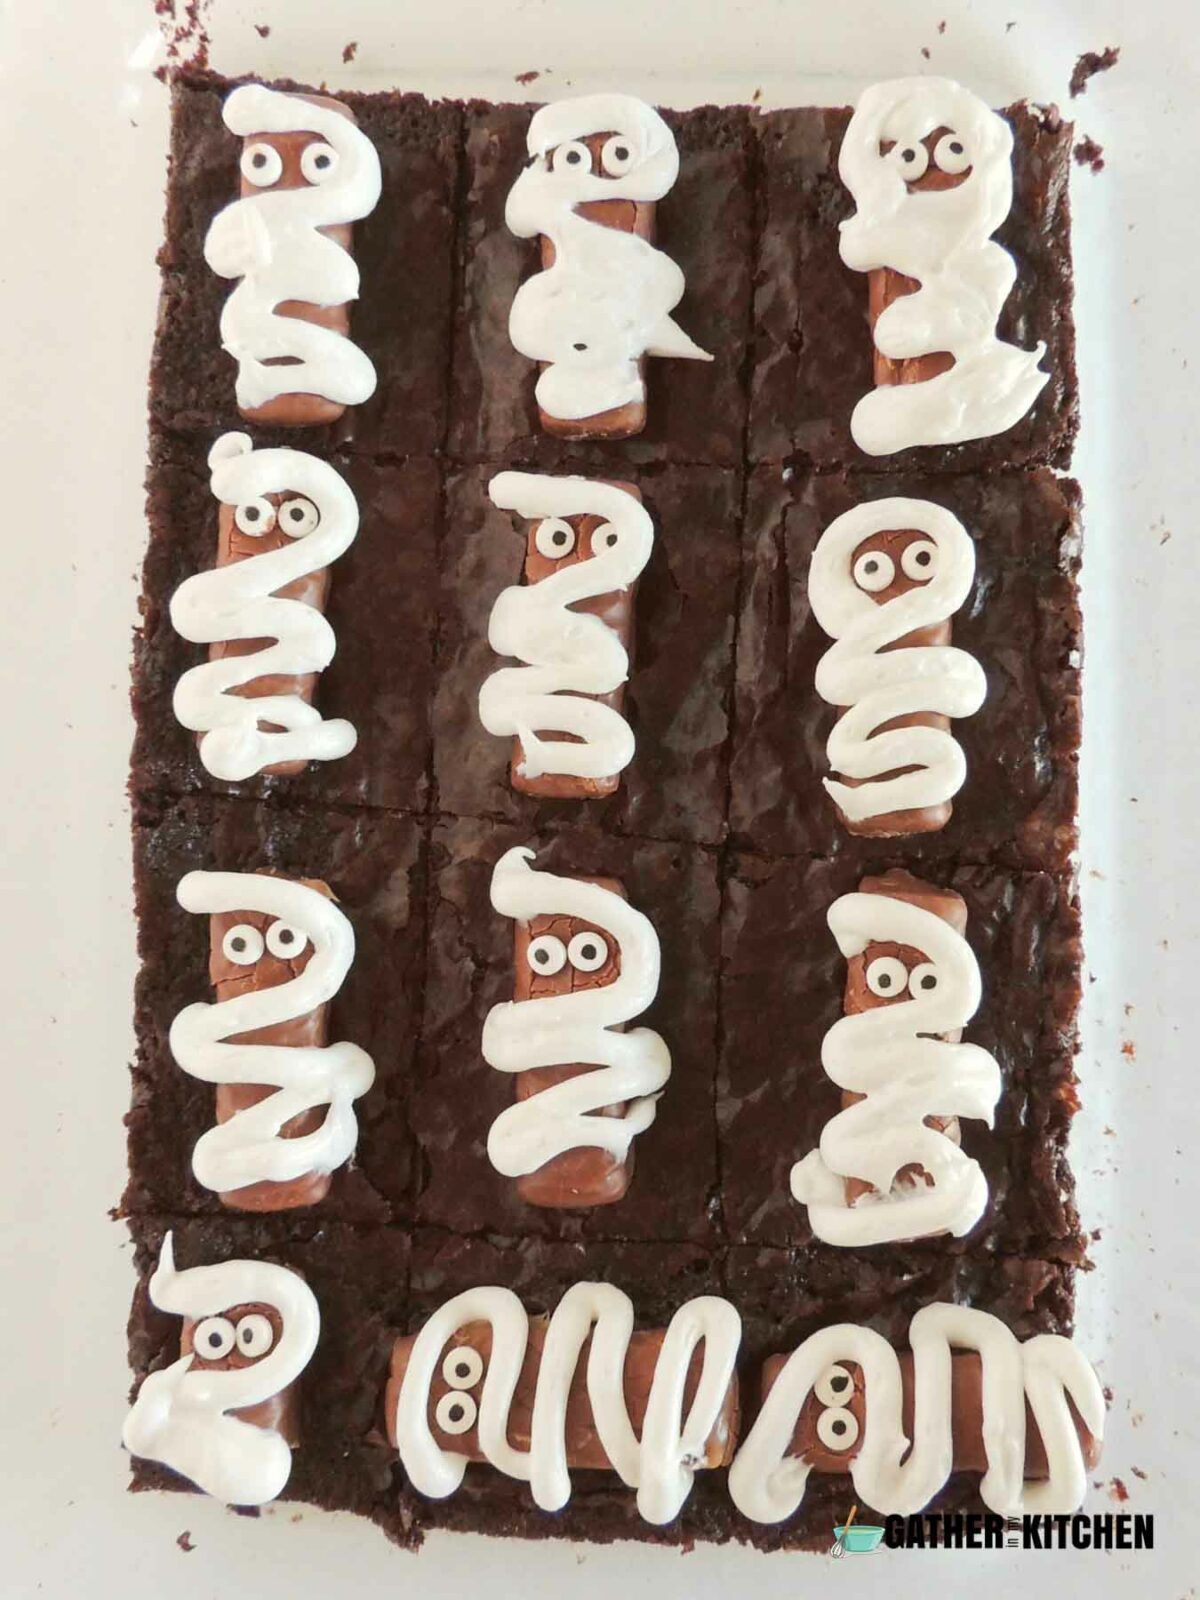 A whole tray of mummy brownies.